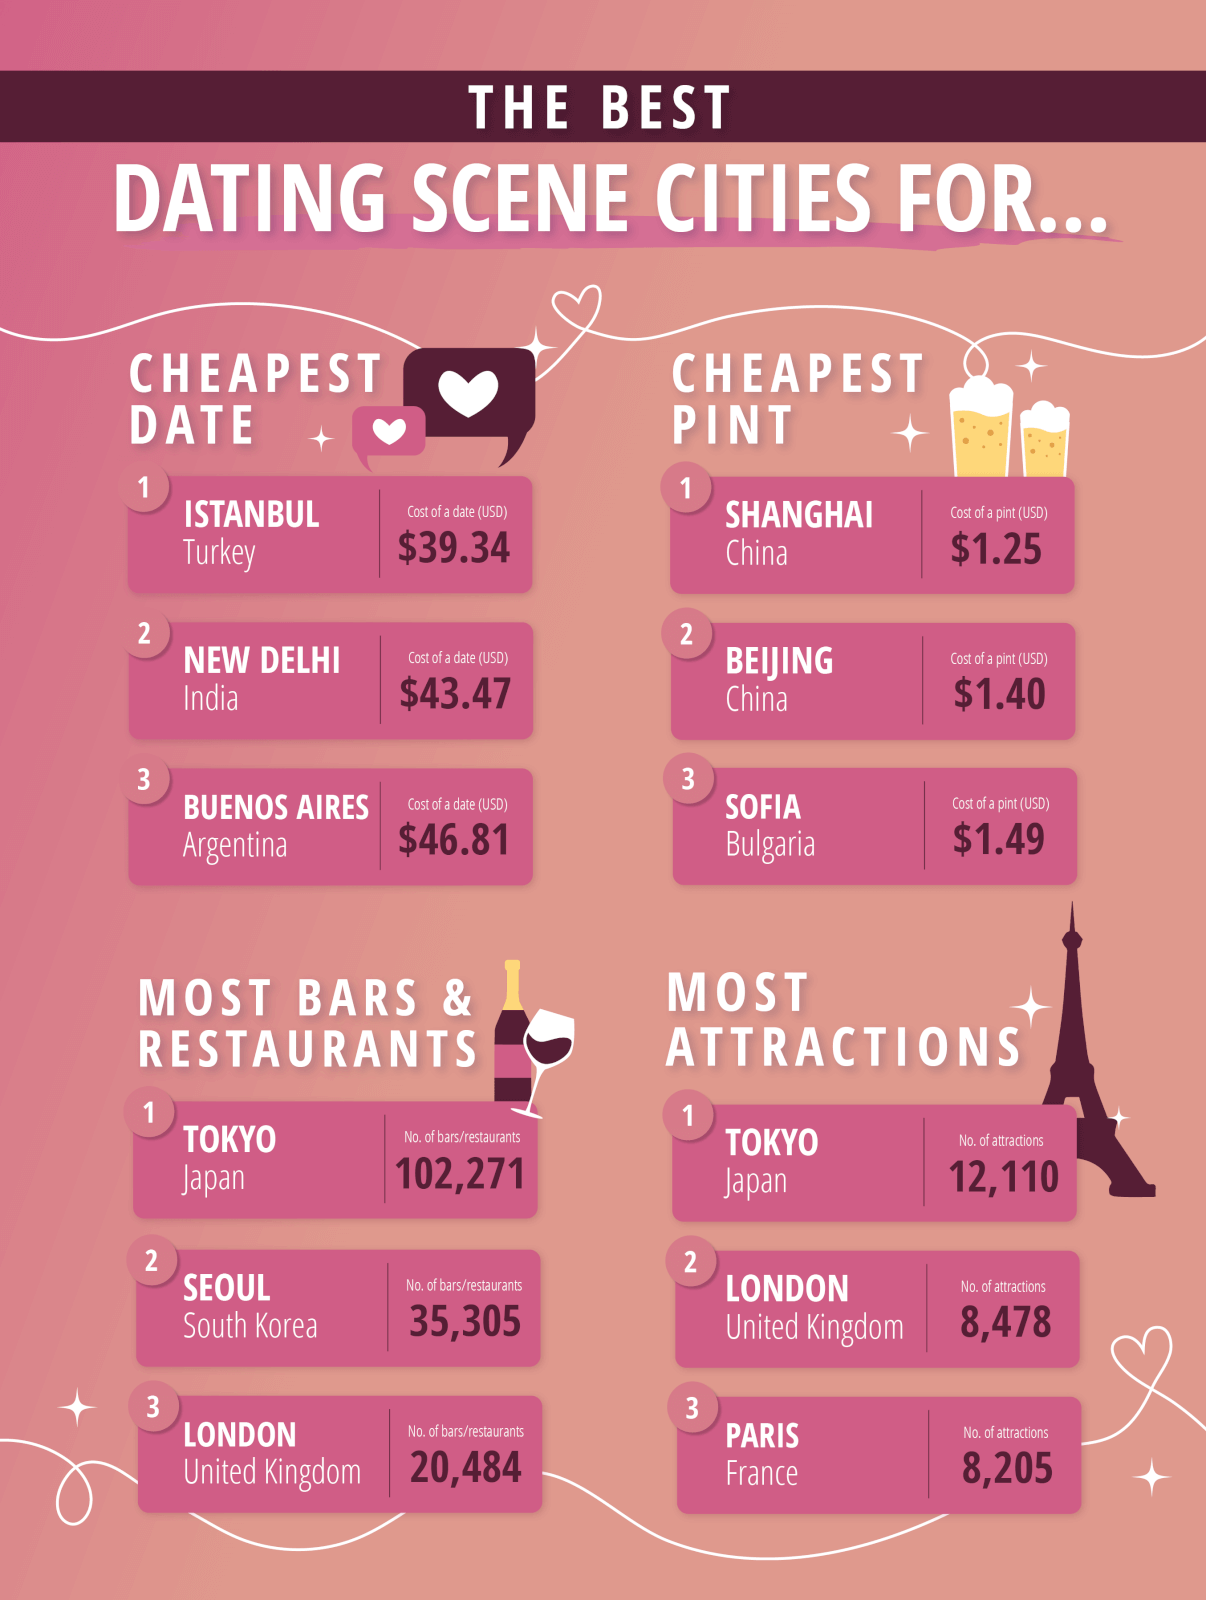 Image showing the top 3 cities for a cheap romantic date, cost of a pint, most bars and restaurants, and the most attractions.